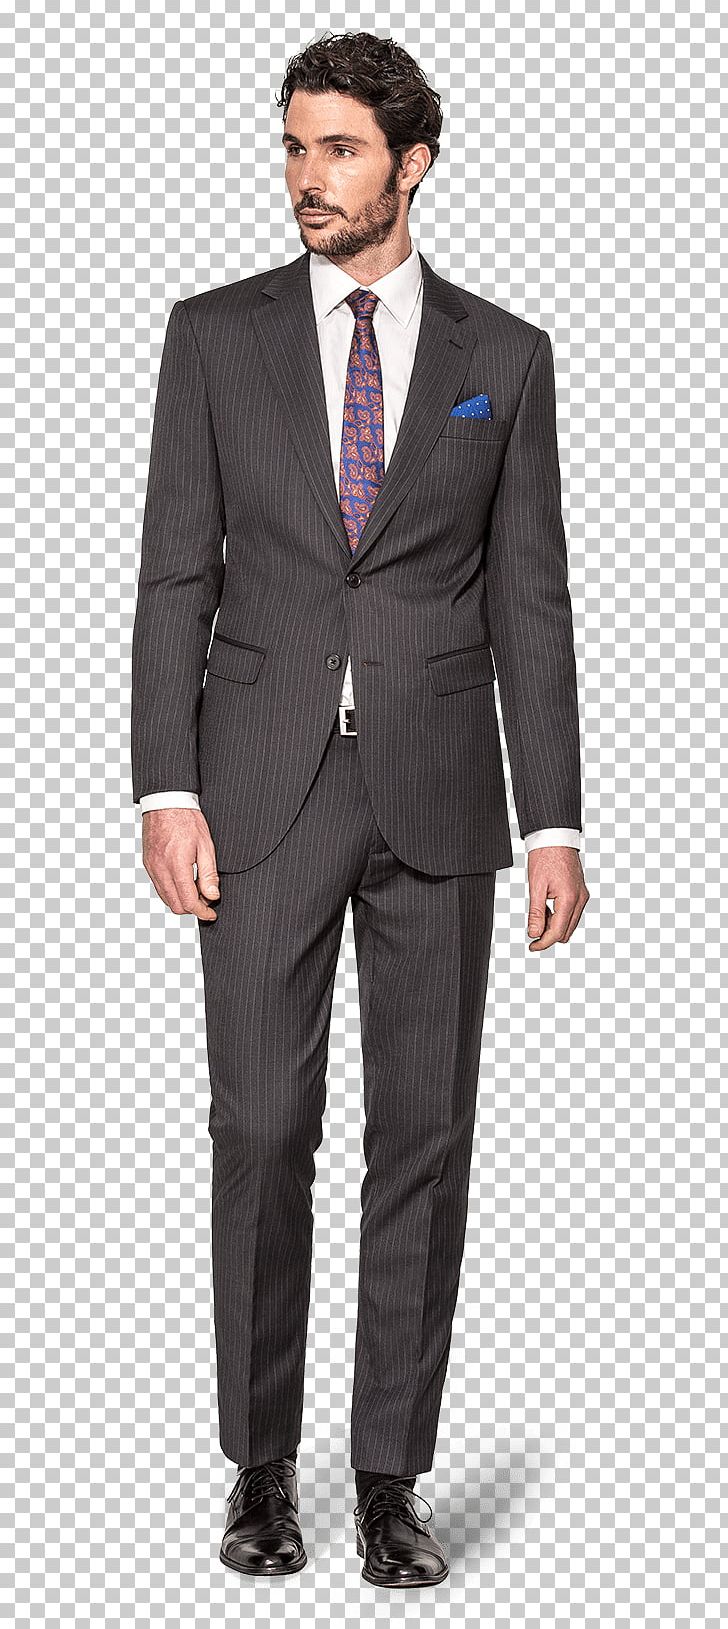 Suit JoS. A. Bank Clothiers Clothing Jacket T. M. Lewin PNG, Clipart, Blazer, Blouse, Business, Businessperson, Casual Free PNG Download